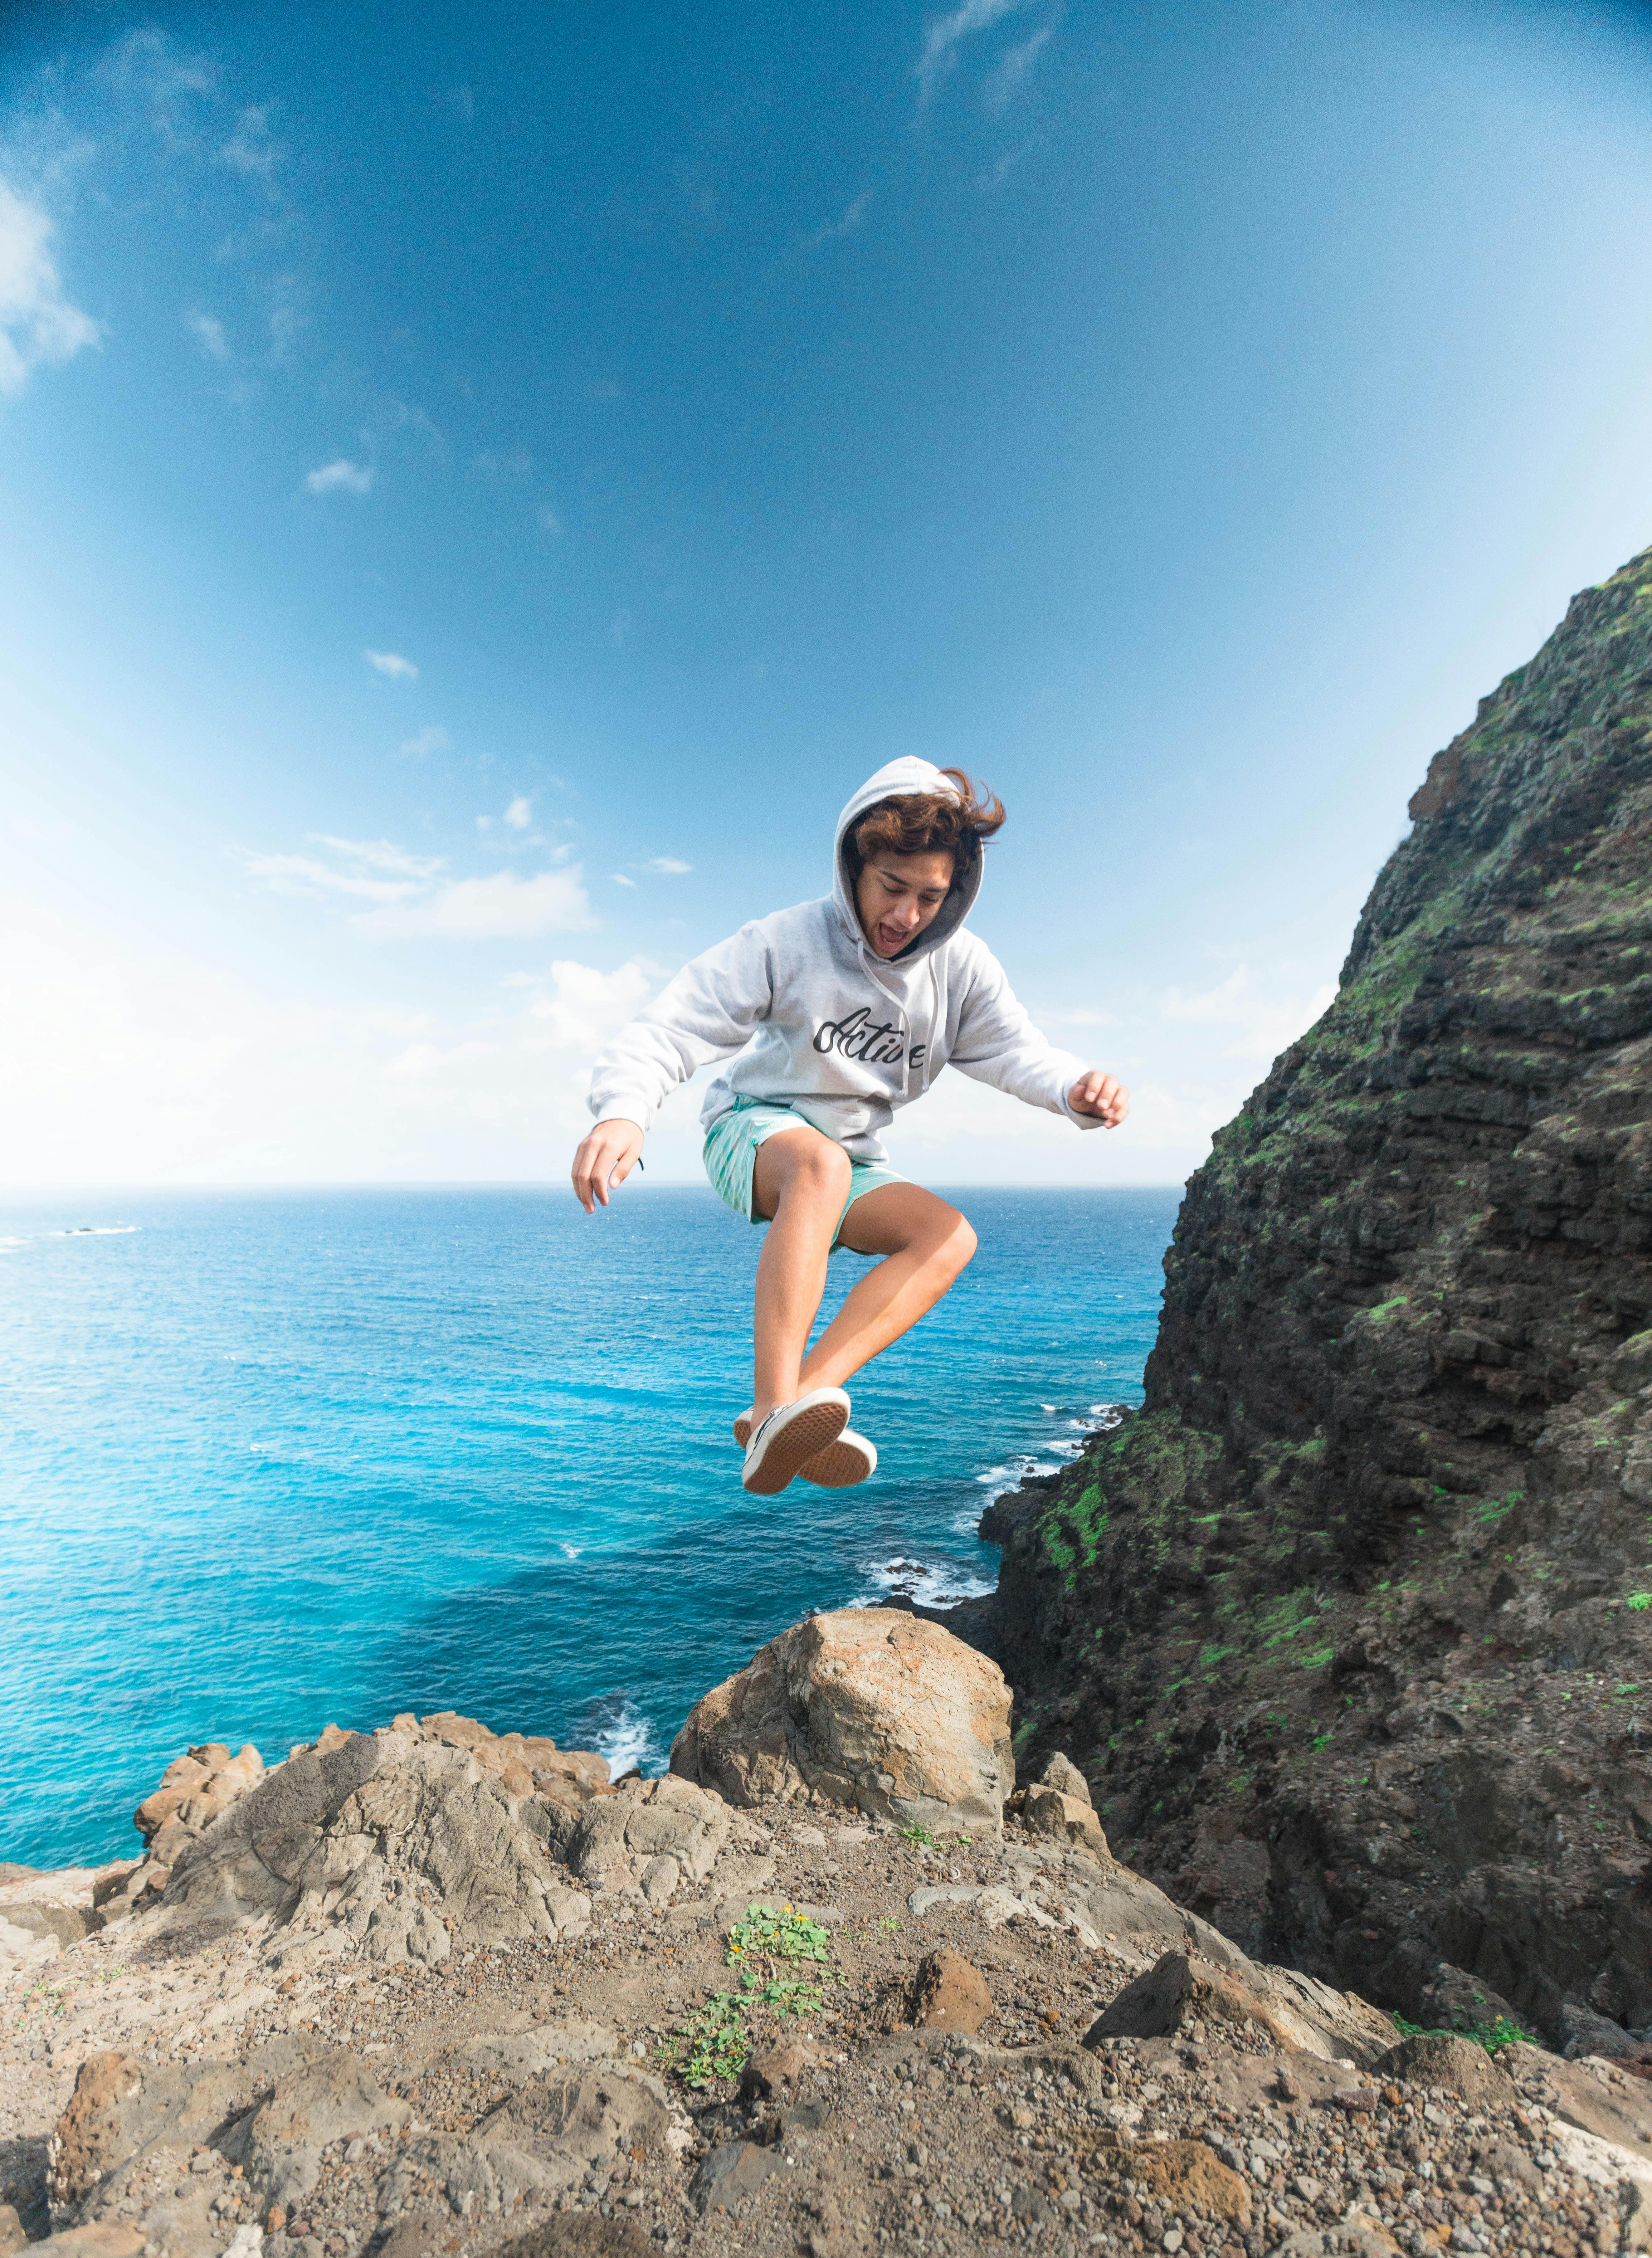 Jumping Photos, Download The BEST Free Jumping Stock Photos & HD